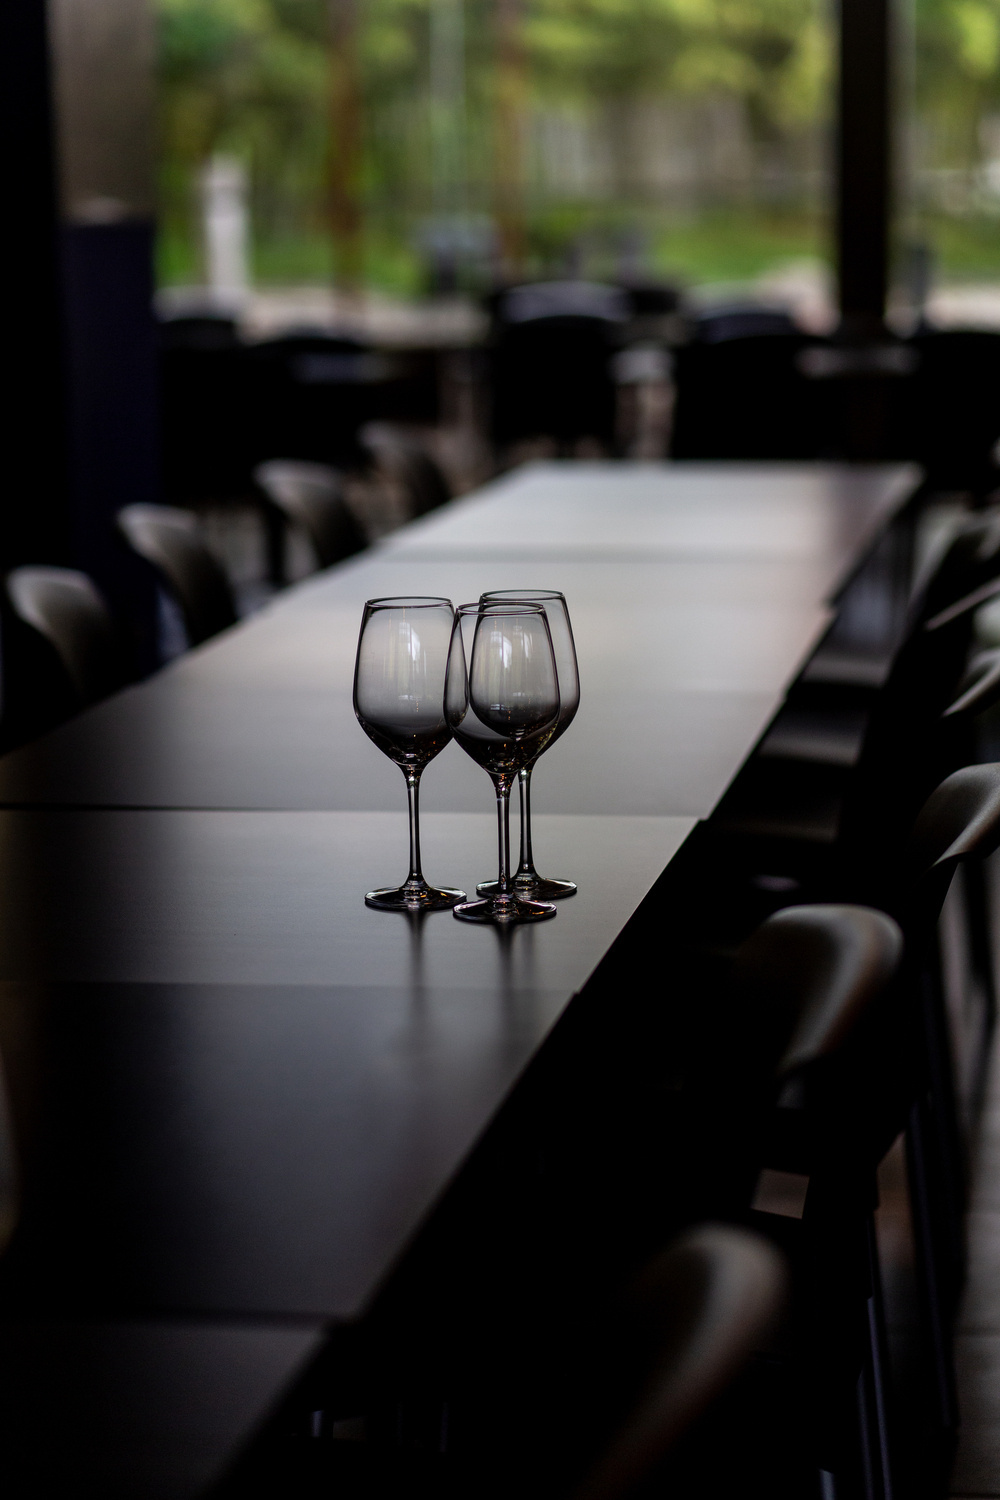 Three empty wine glasses on a long dark table with chairs lined up along it, with a blurred background of a room with large windows and outdoor greenery.